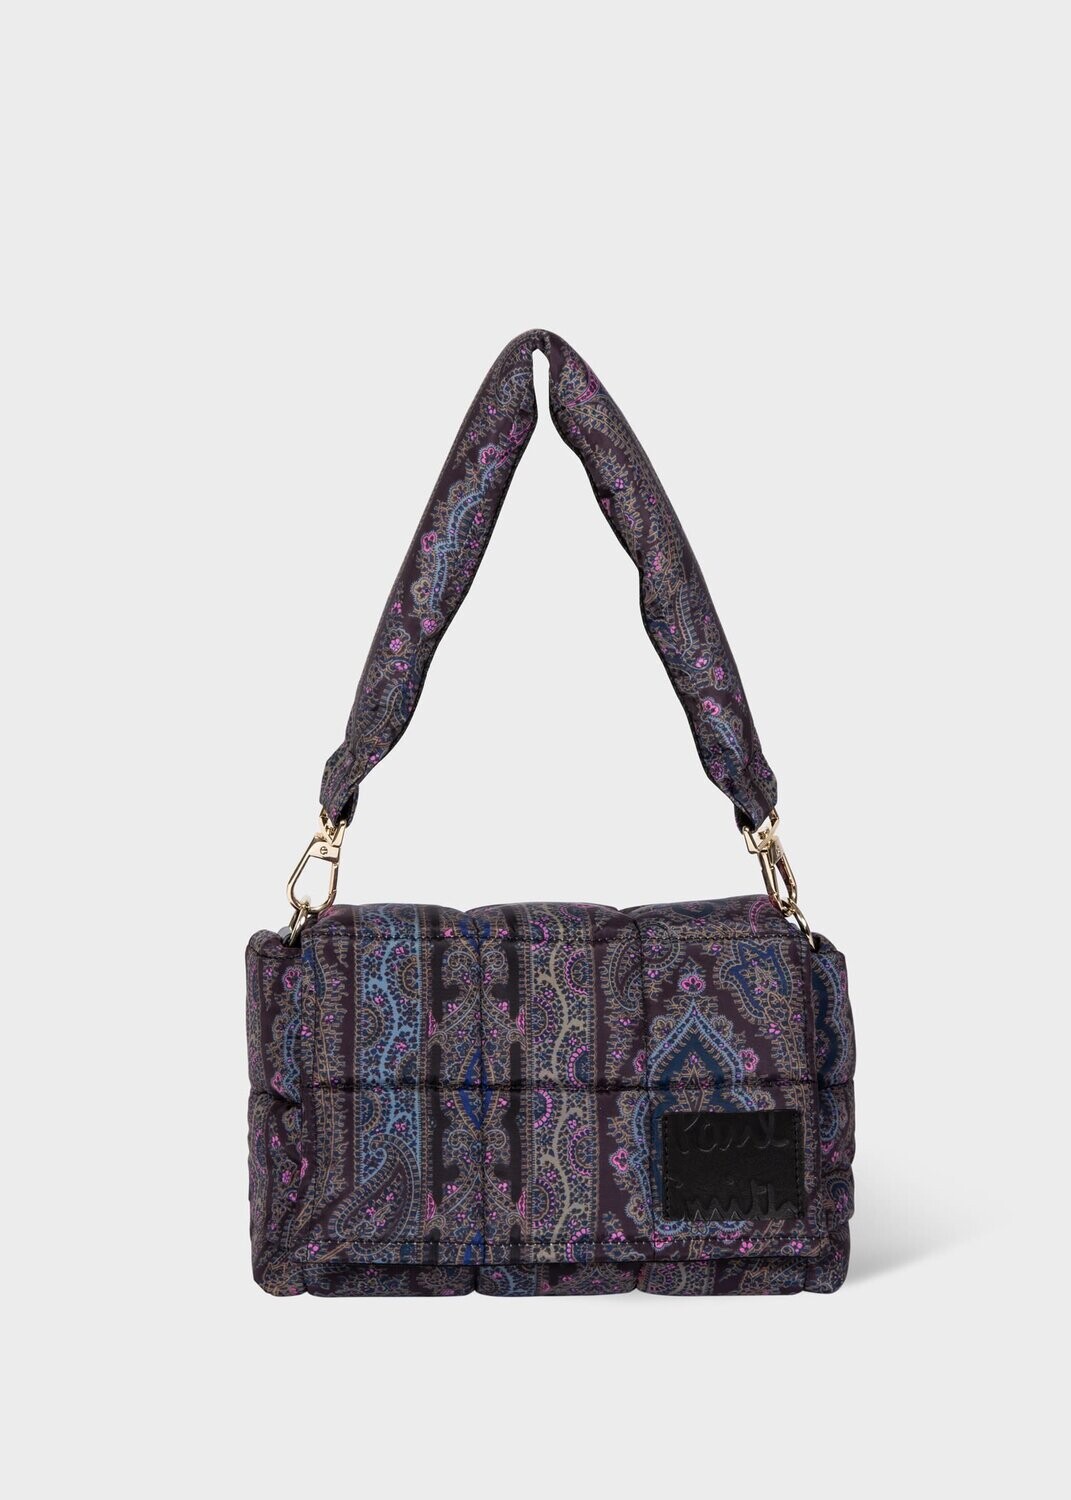 Paul Smith Purple Paisley Print Quilted Bag